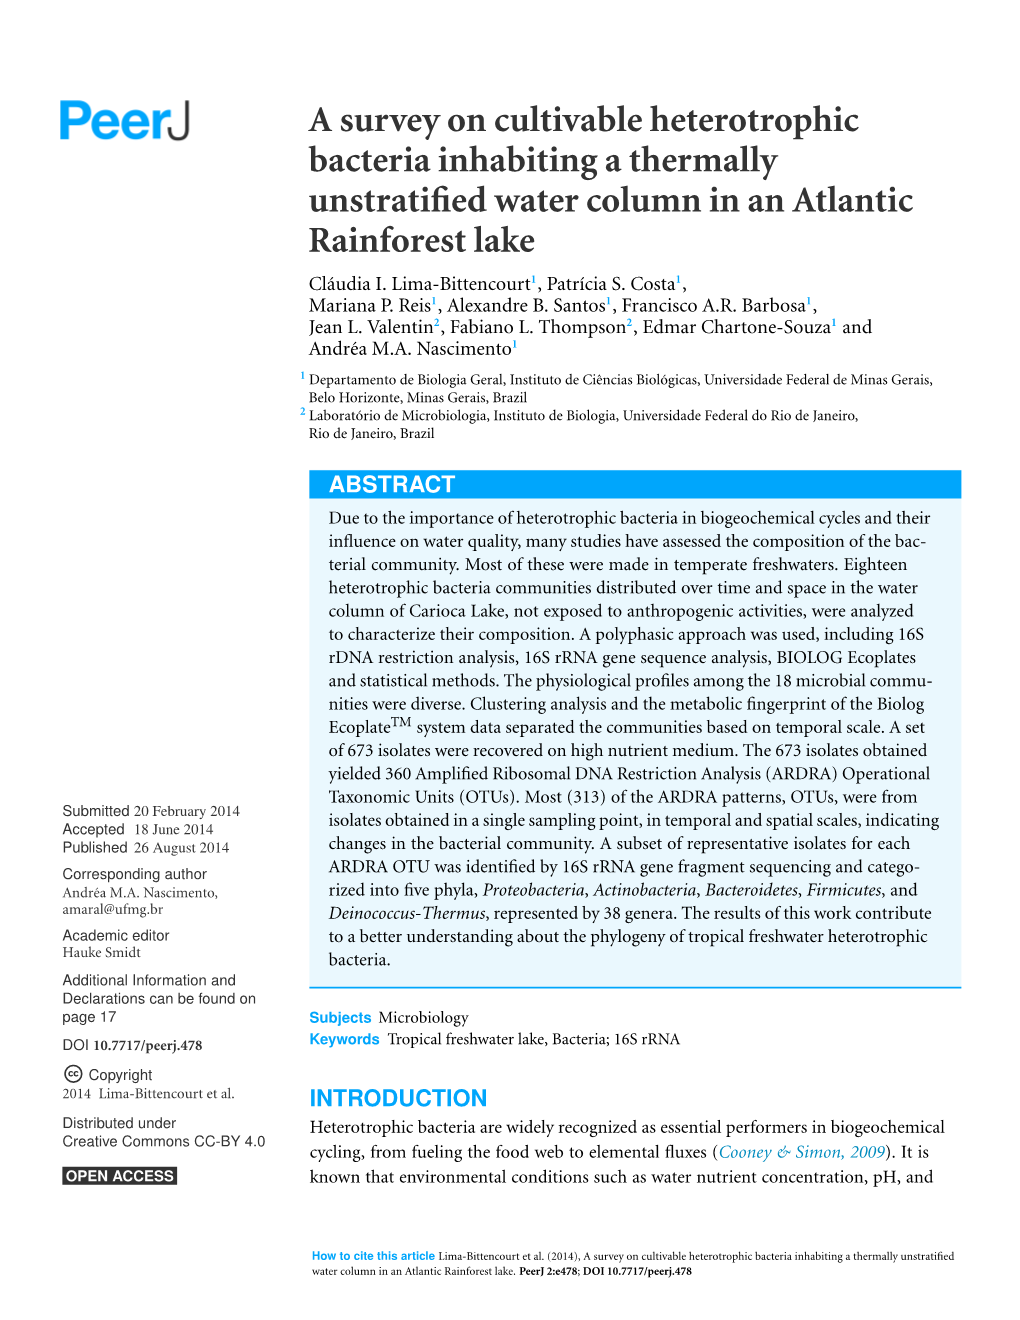 A Survey on Cultivable Heterotrophic Bacteria Inhabiting a Thermally Unstratified Water Column in an Atlantic Rainforest Lake Claudia´ I